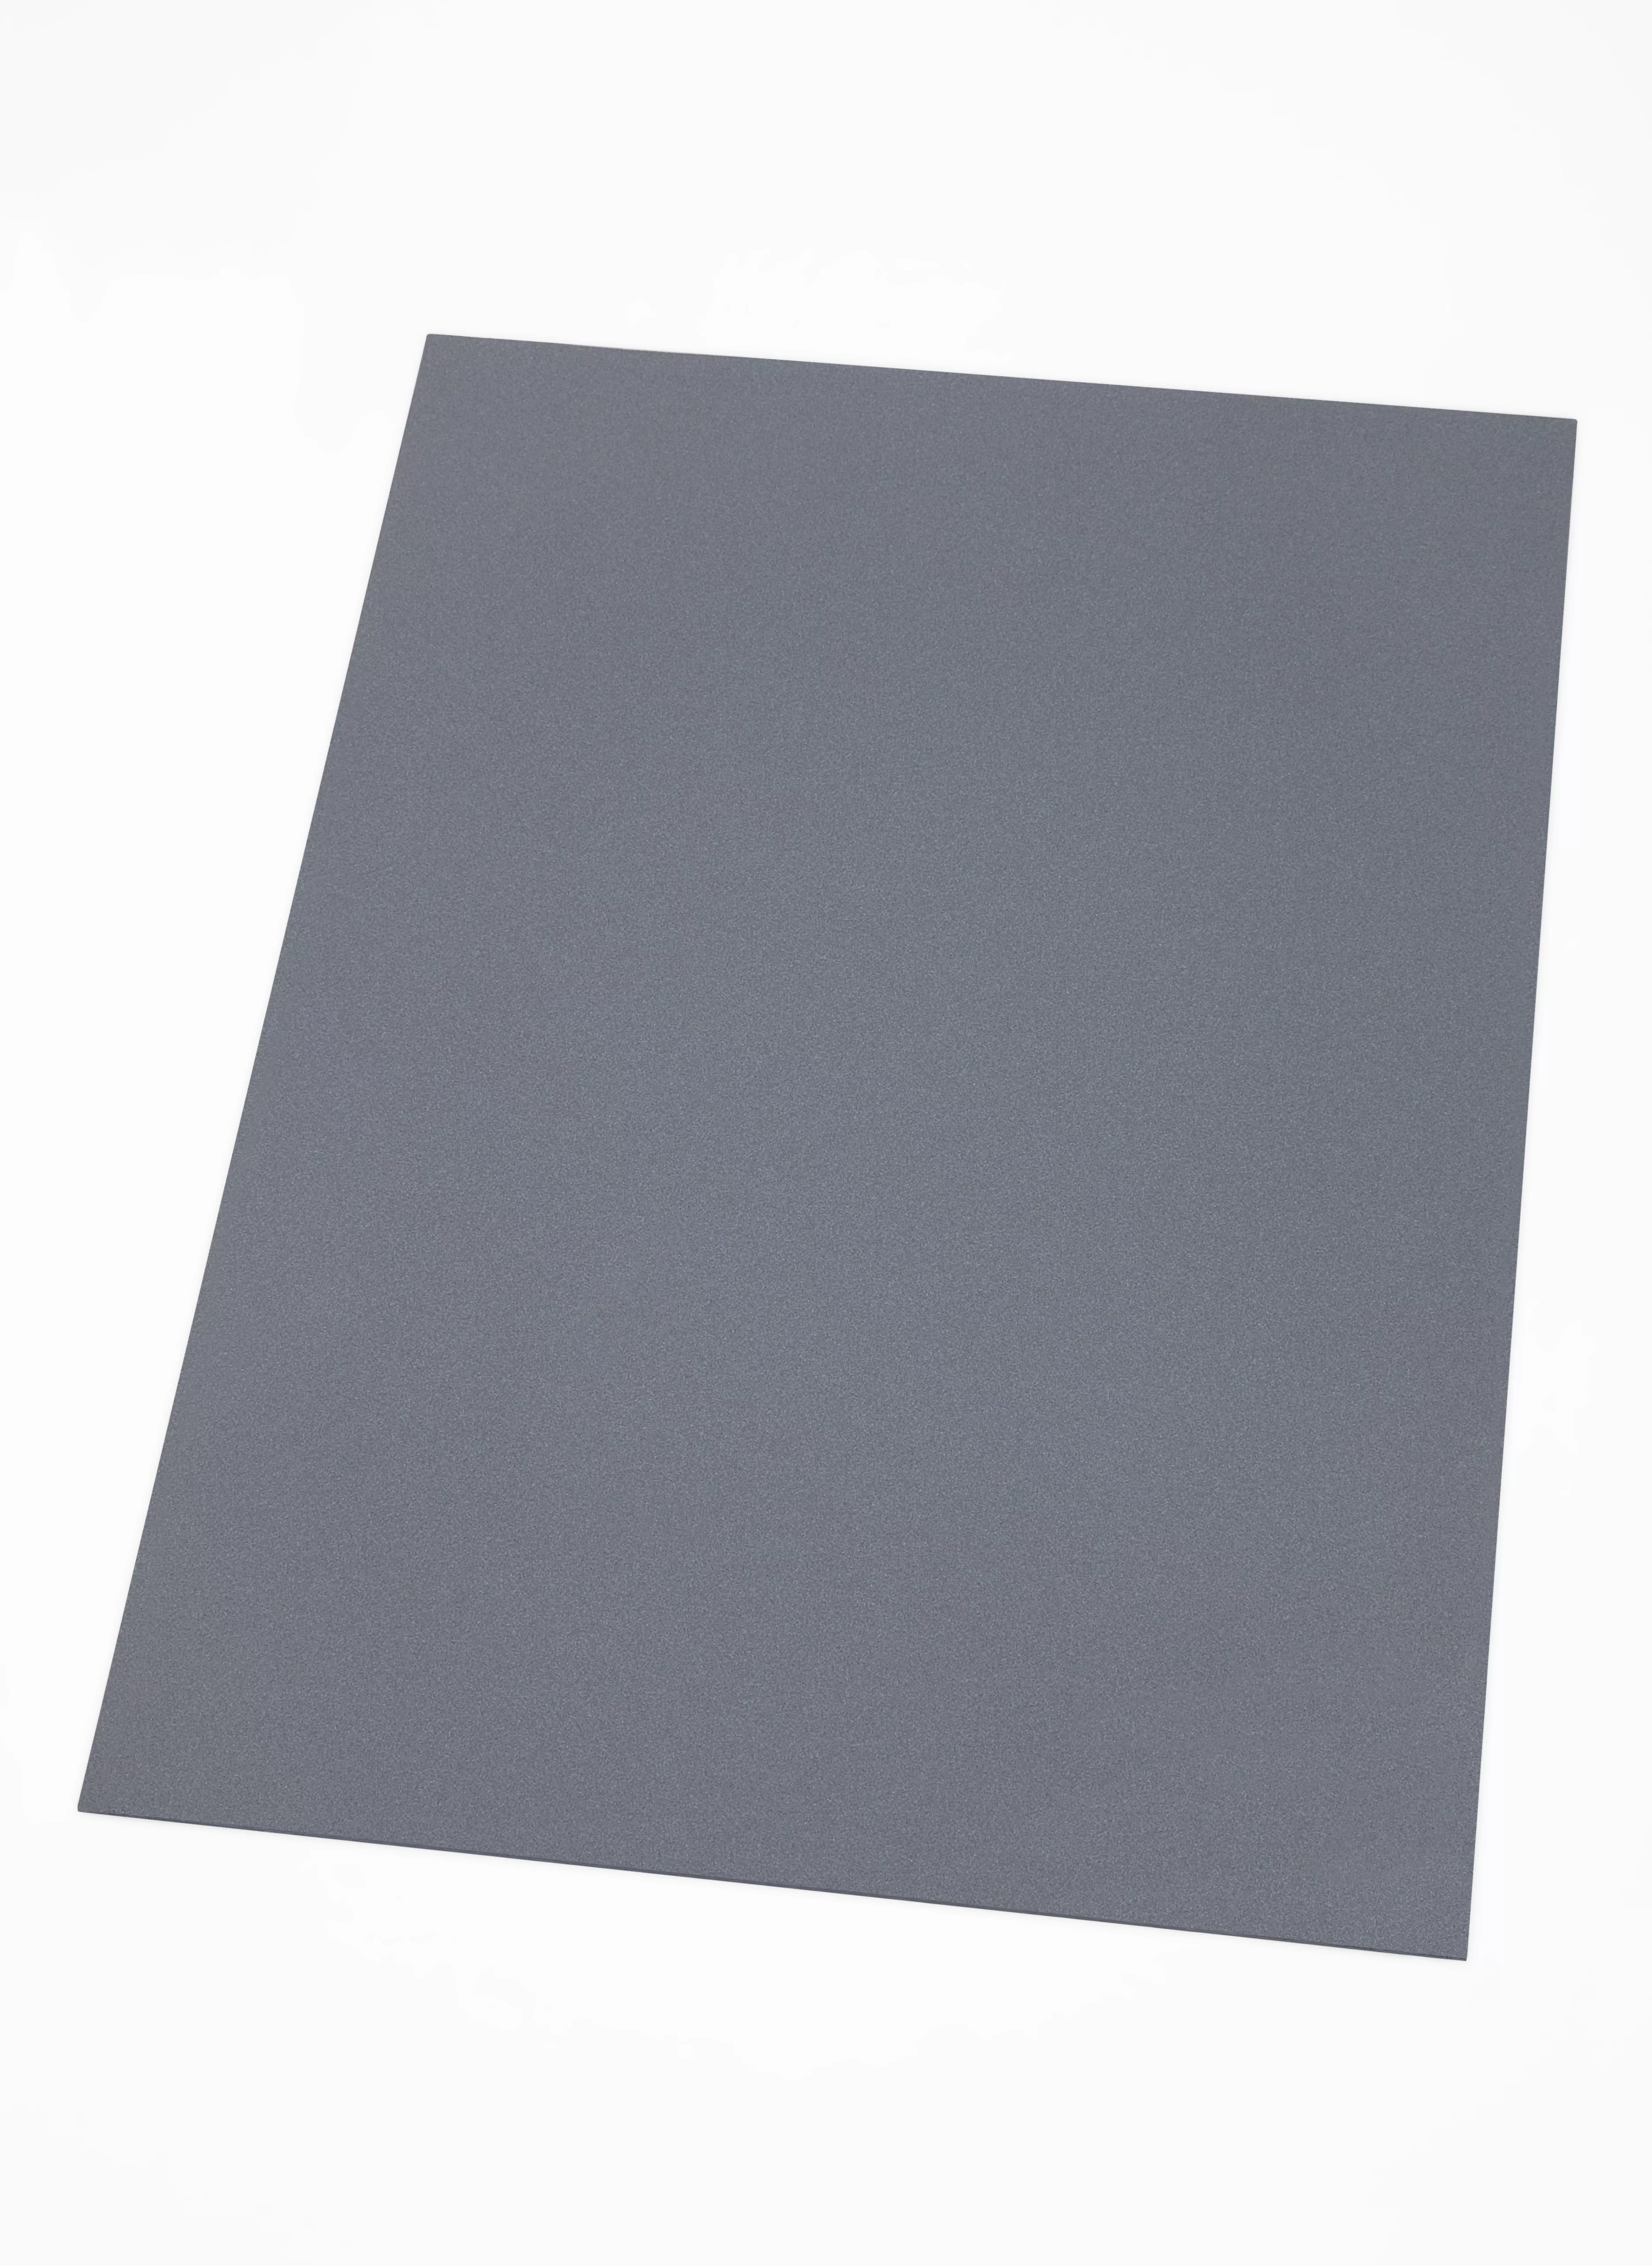 3M™ Thermally Conductive Interface Pad Sheet 5516, 320 mm x 230 mm 2.0
mm, 20/Case